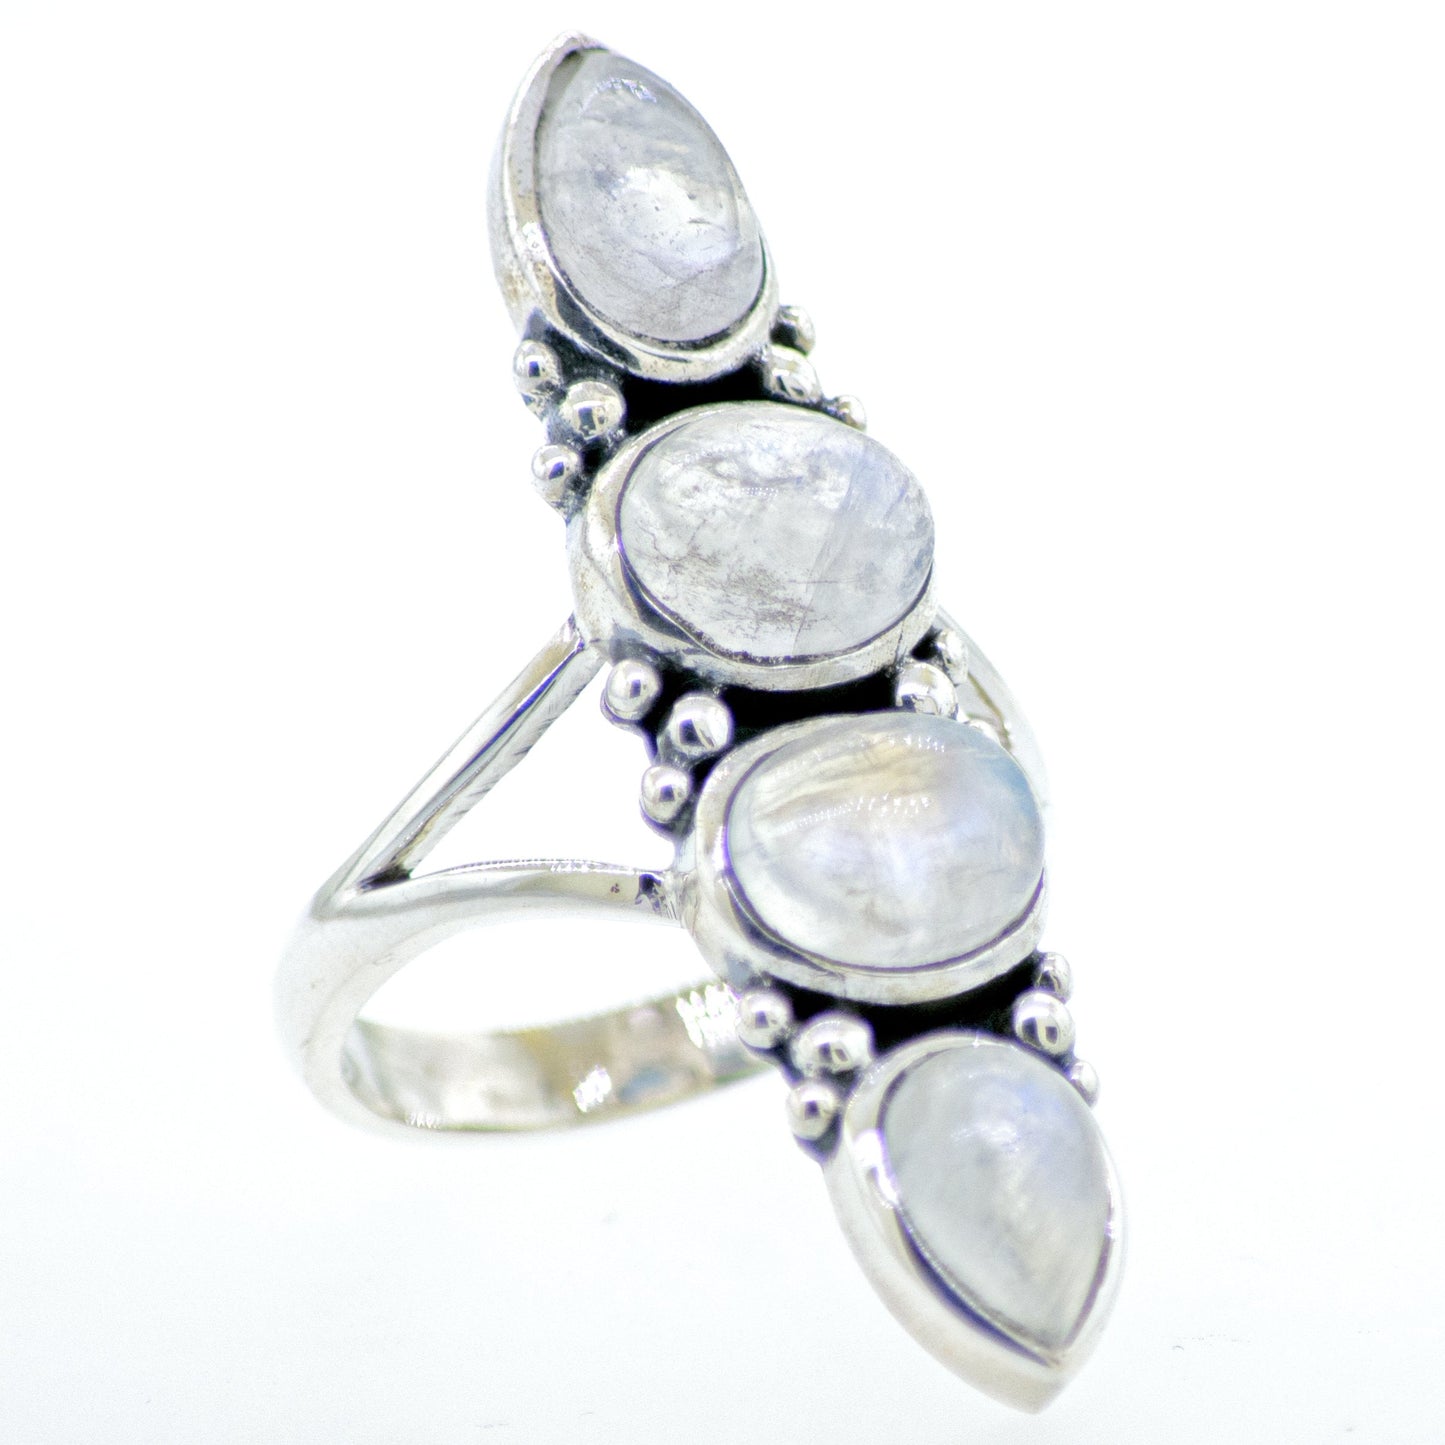 A Super Silver sterling silver ring with three Online Only Exclusive Elongated Moonstones on it, available at our online store.